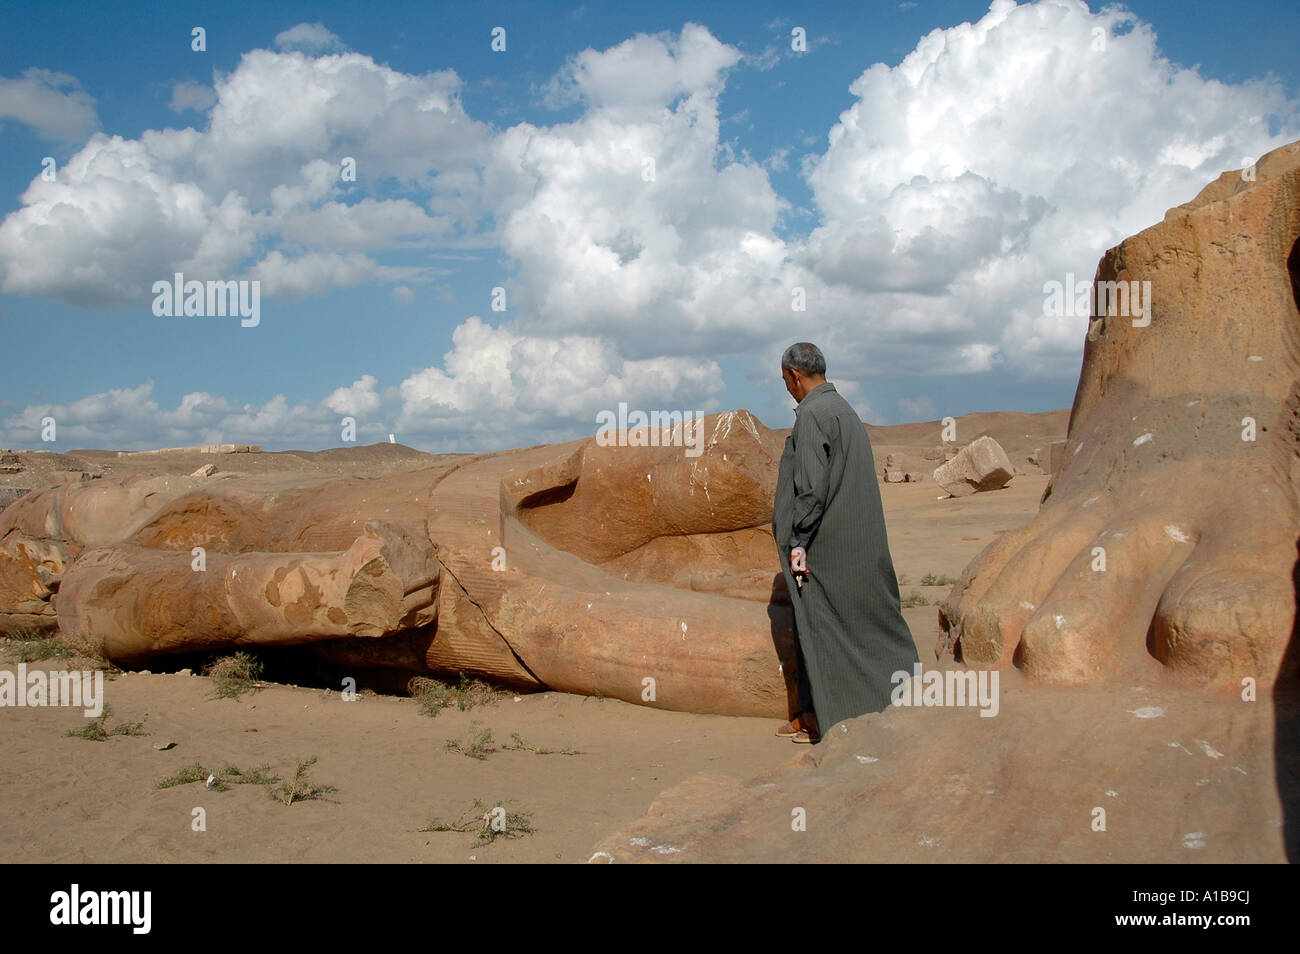 An Egyptian man stands by sculptural fragments, recovered from the excavations at the ancient temple site of Tanis in eastern Nile river delta Egypt Stock Photo